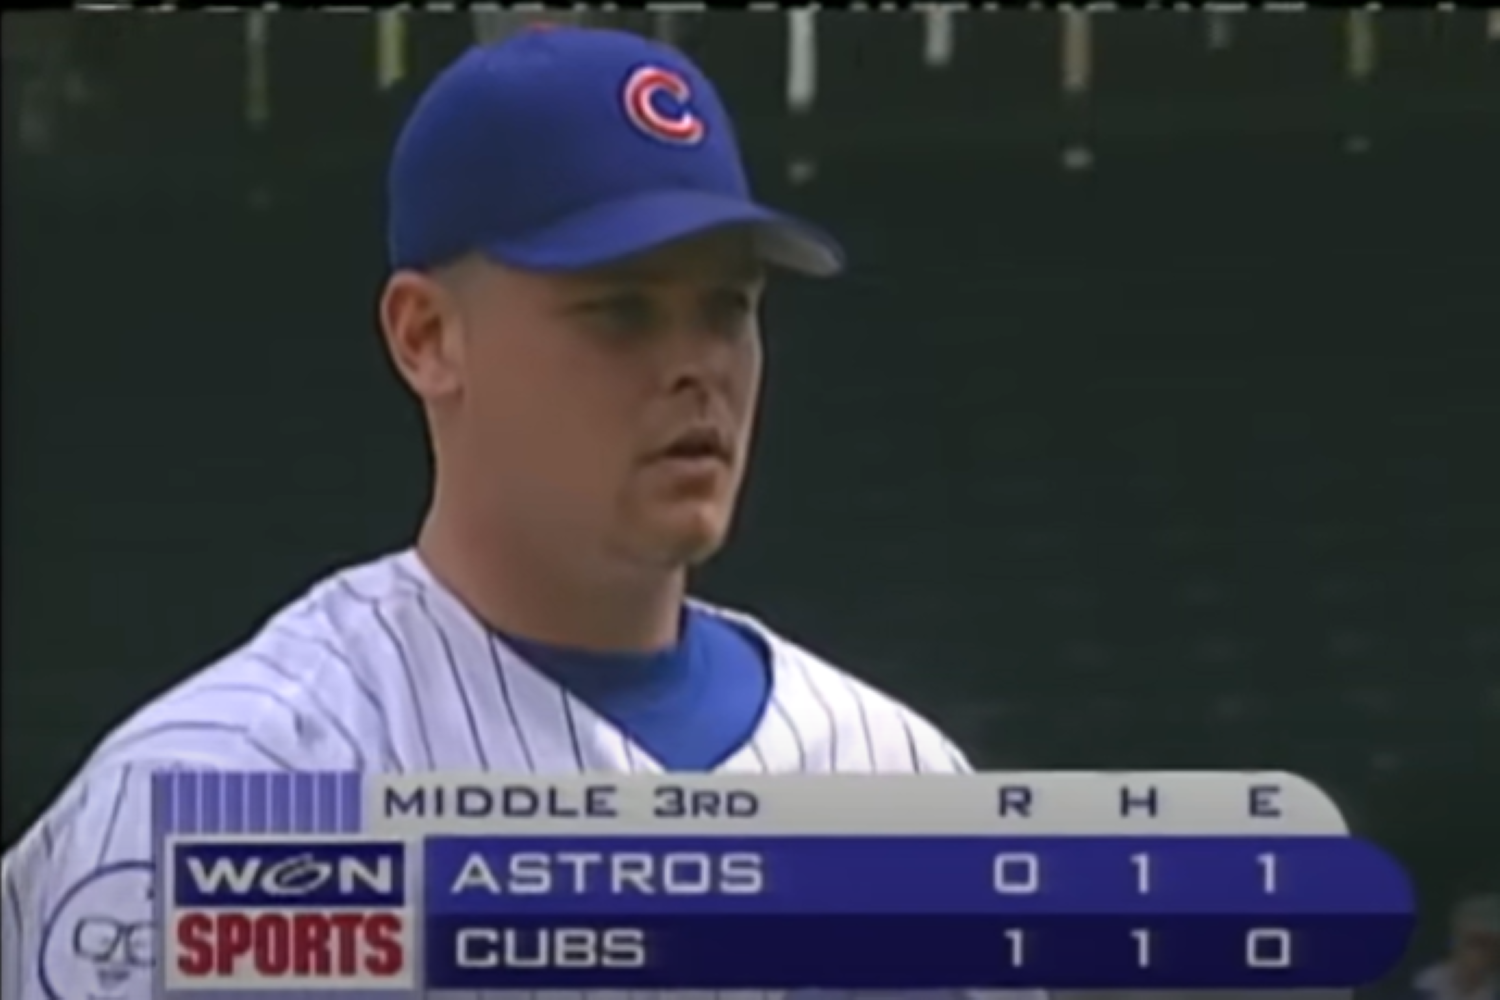 kerry wood 20 strikeout game